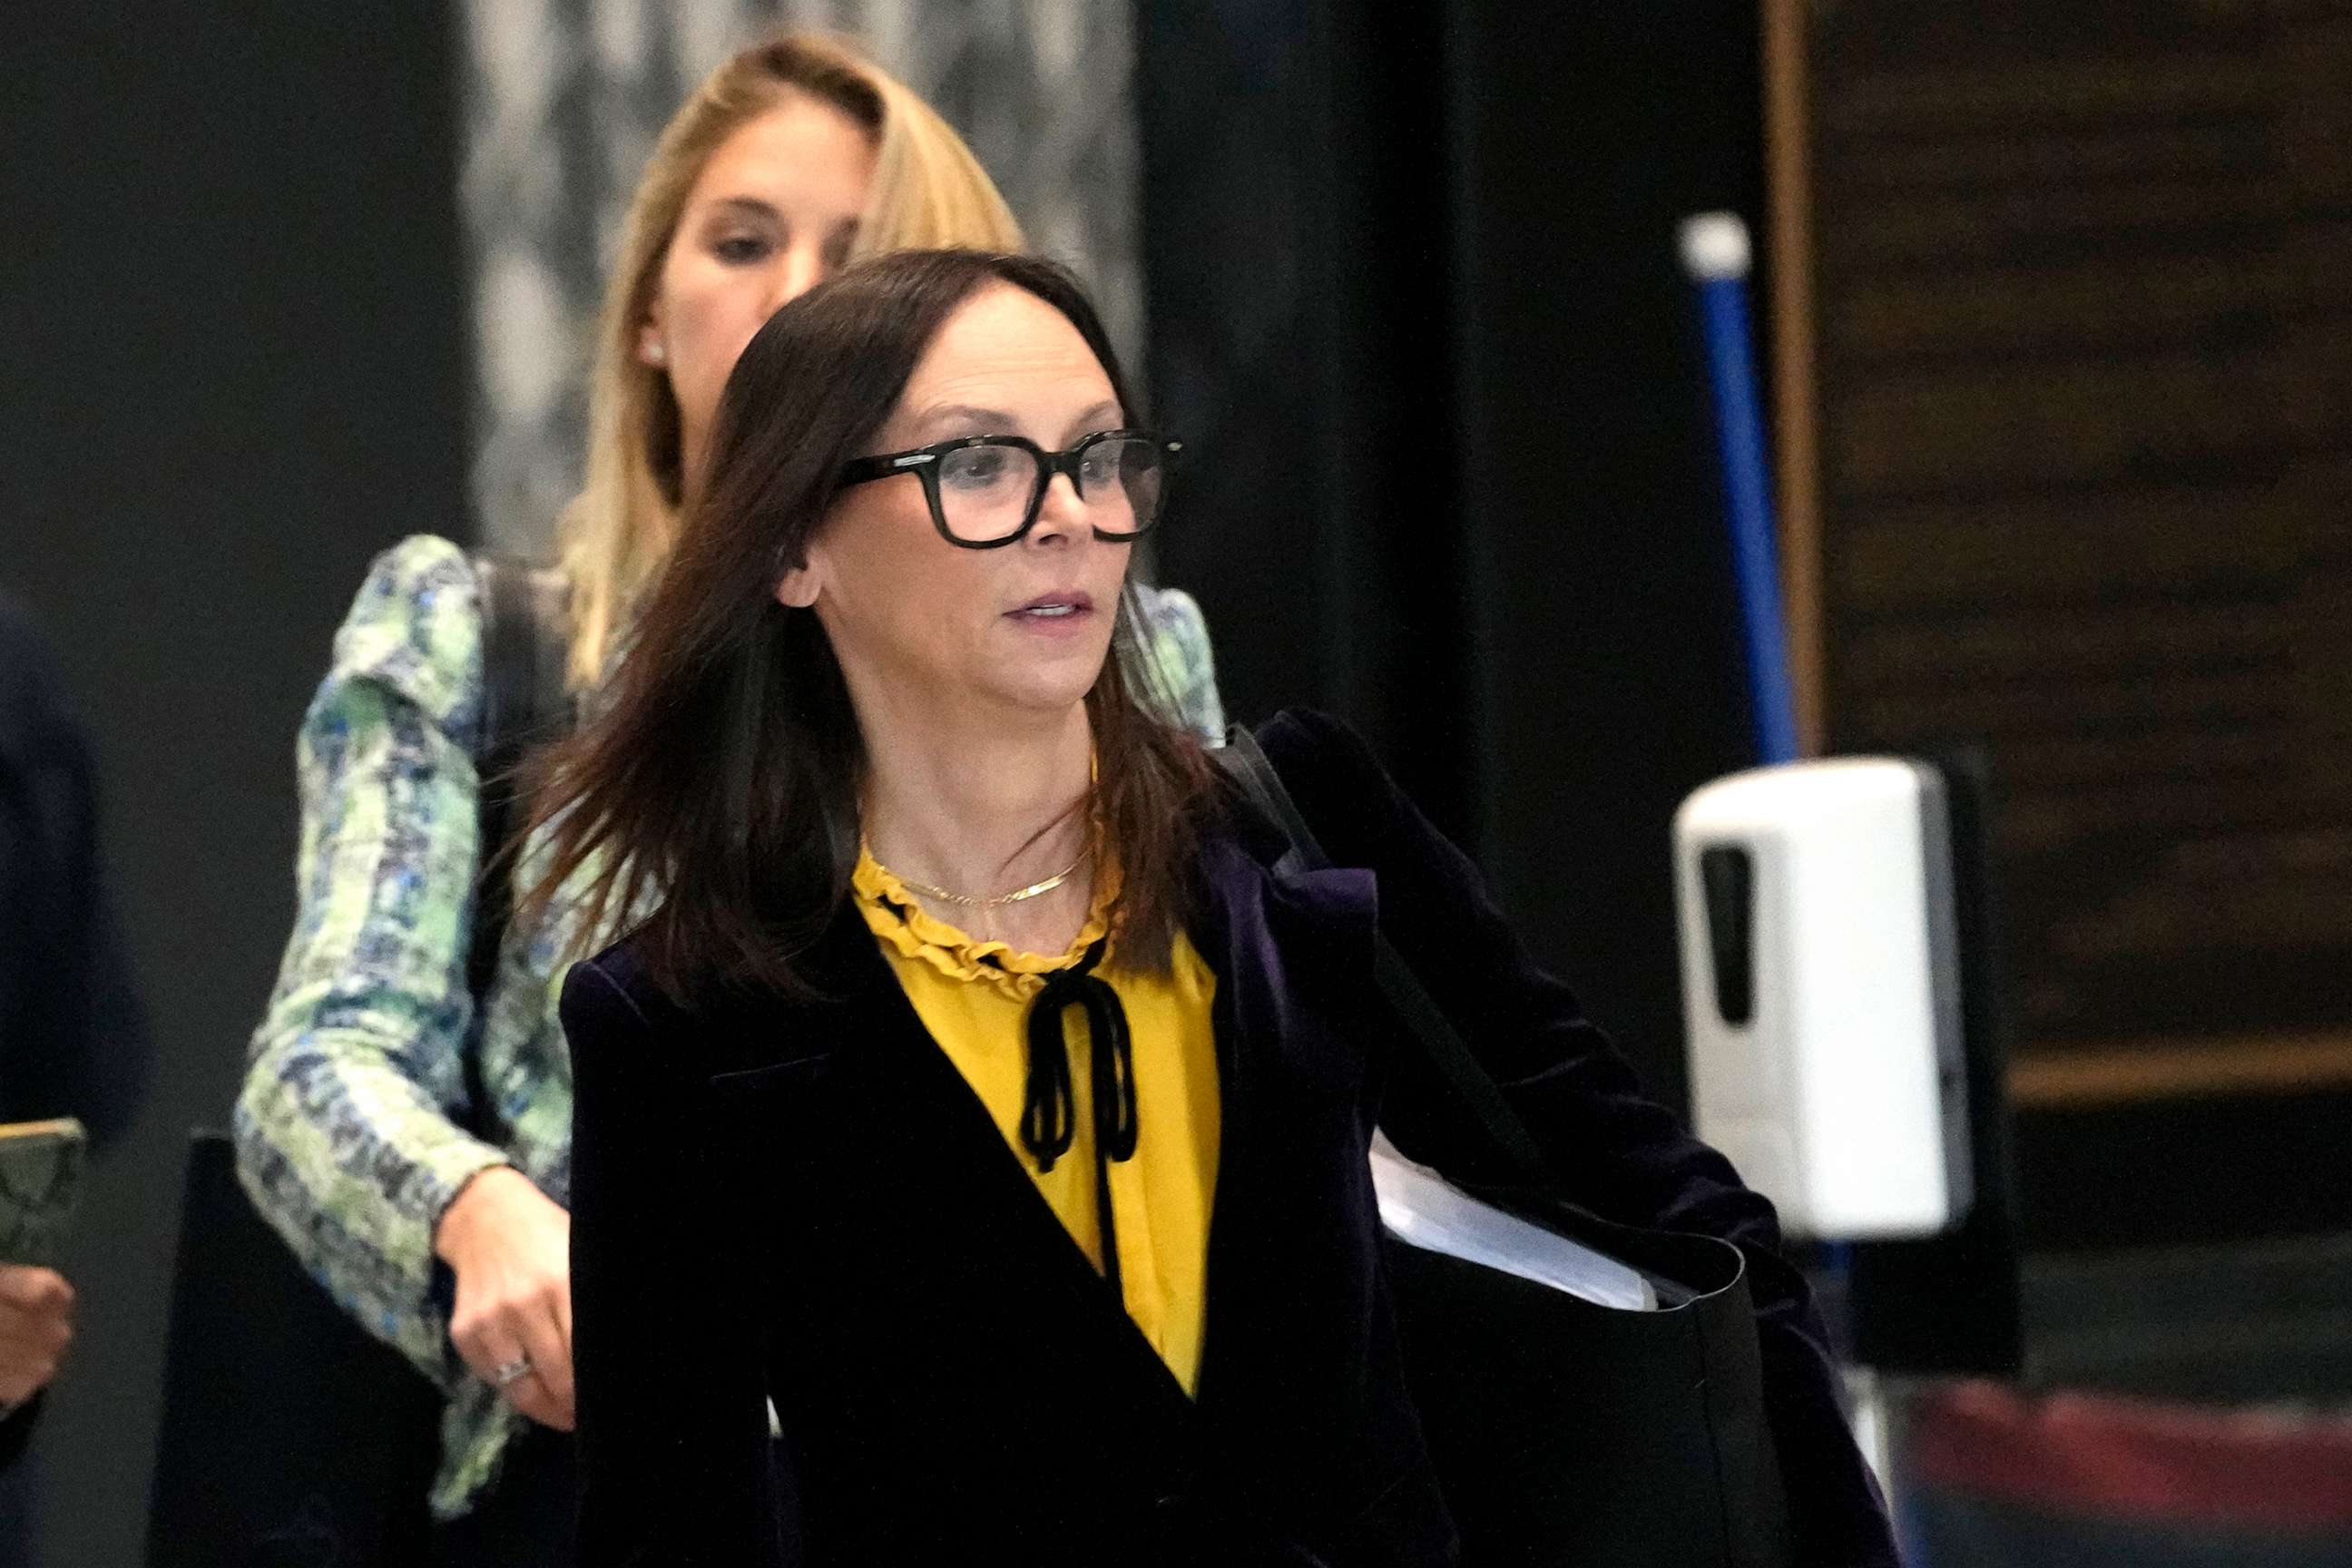 PHOTO: Attorneys for R. Kelly, Jennifer Bonjean, right, and Ashley Cohen arrive at the Dirksen Federal Building for Kelly's sentencing hearing on Feb. 23, 2023, in Chicago.